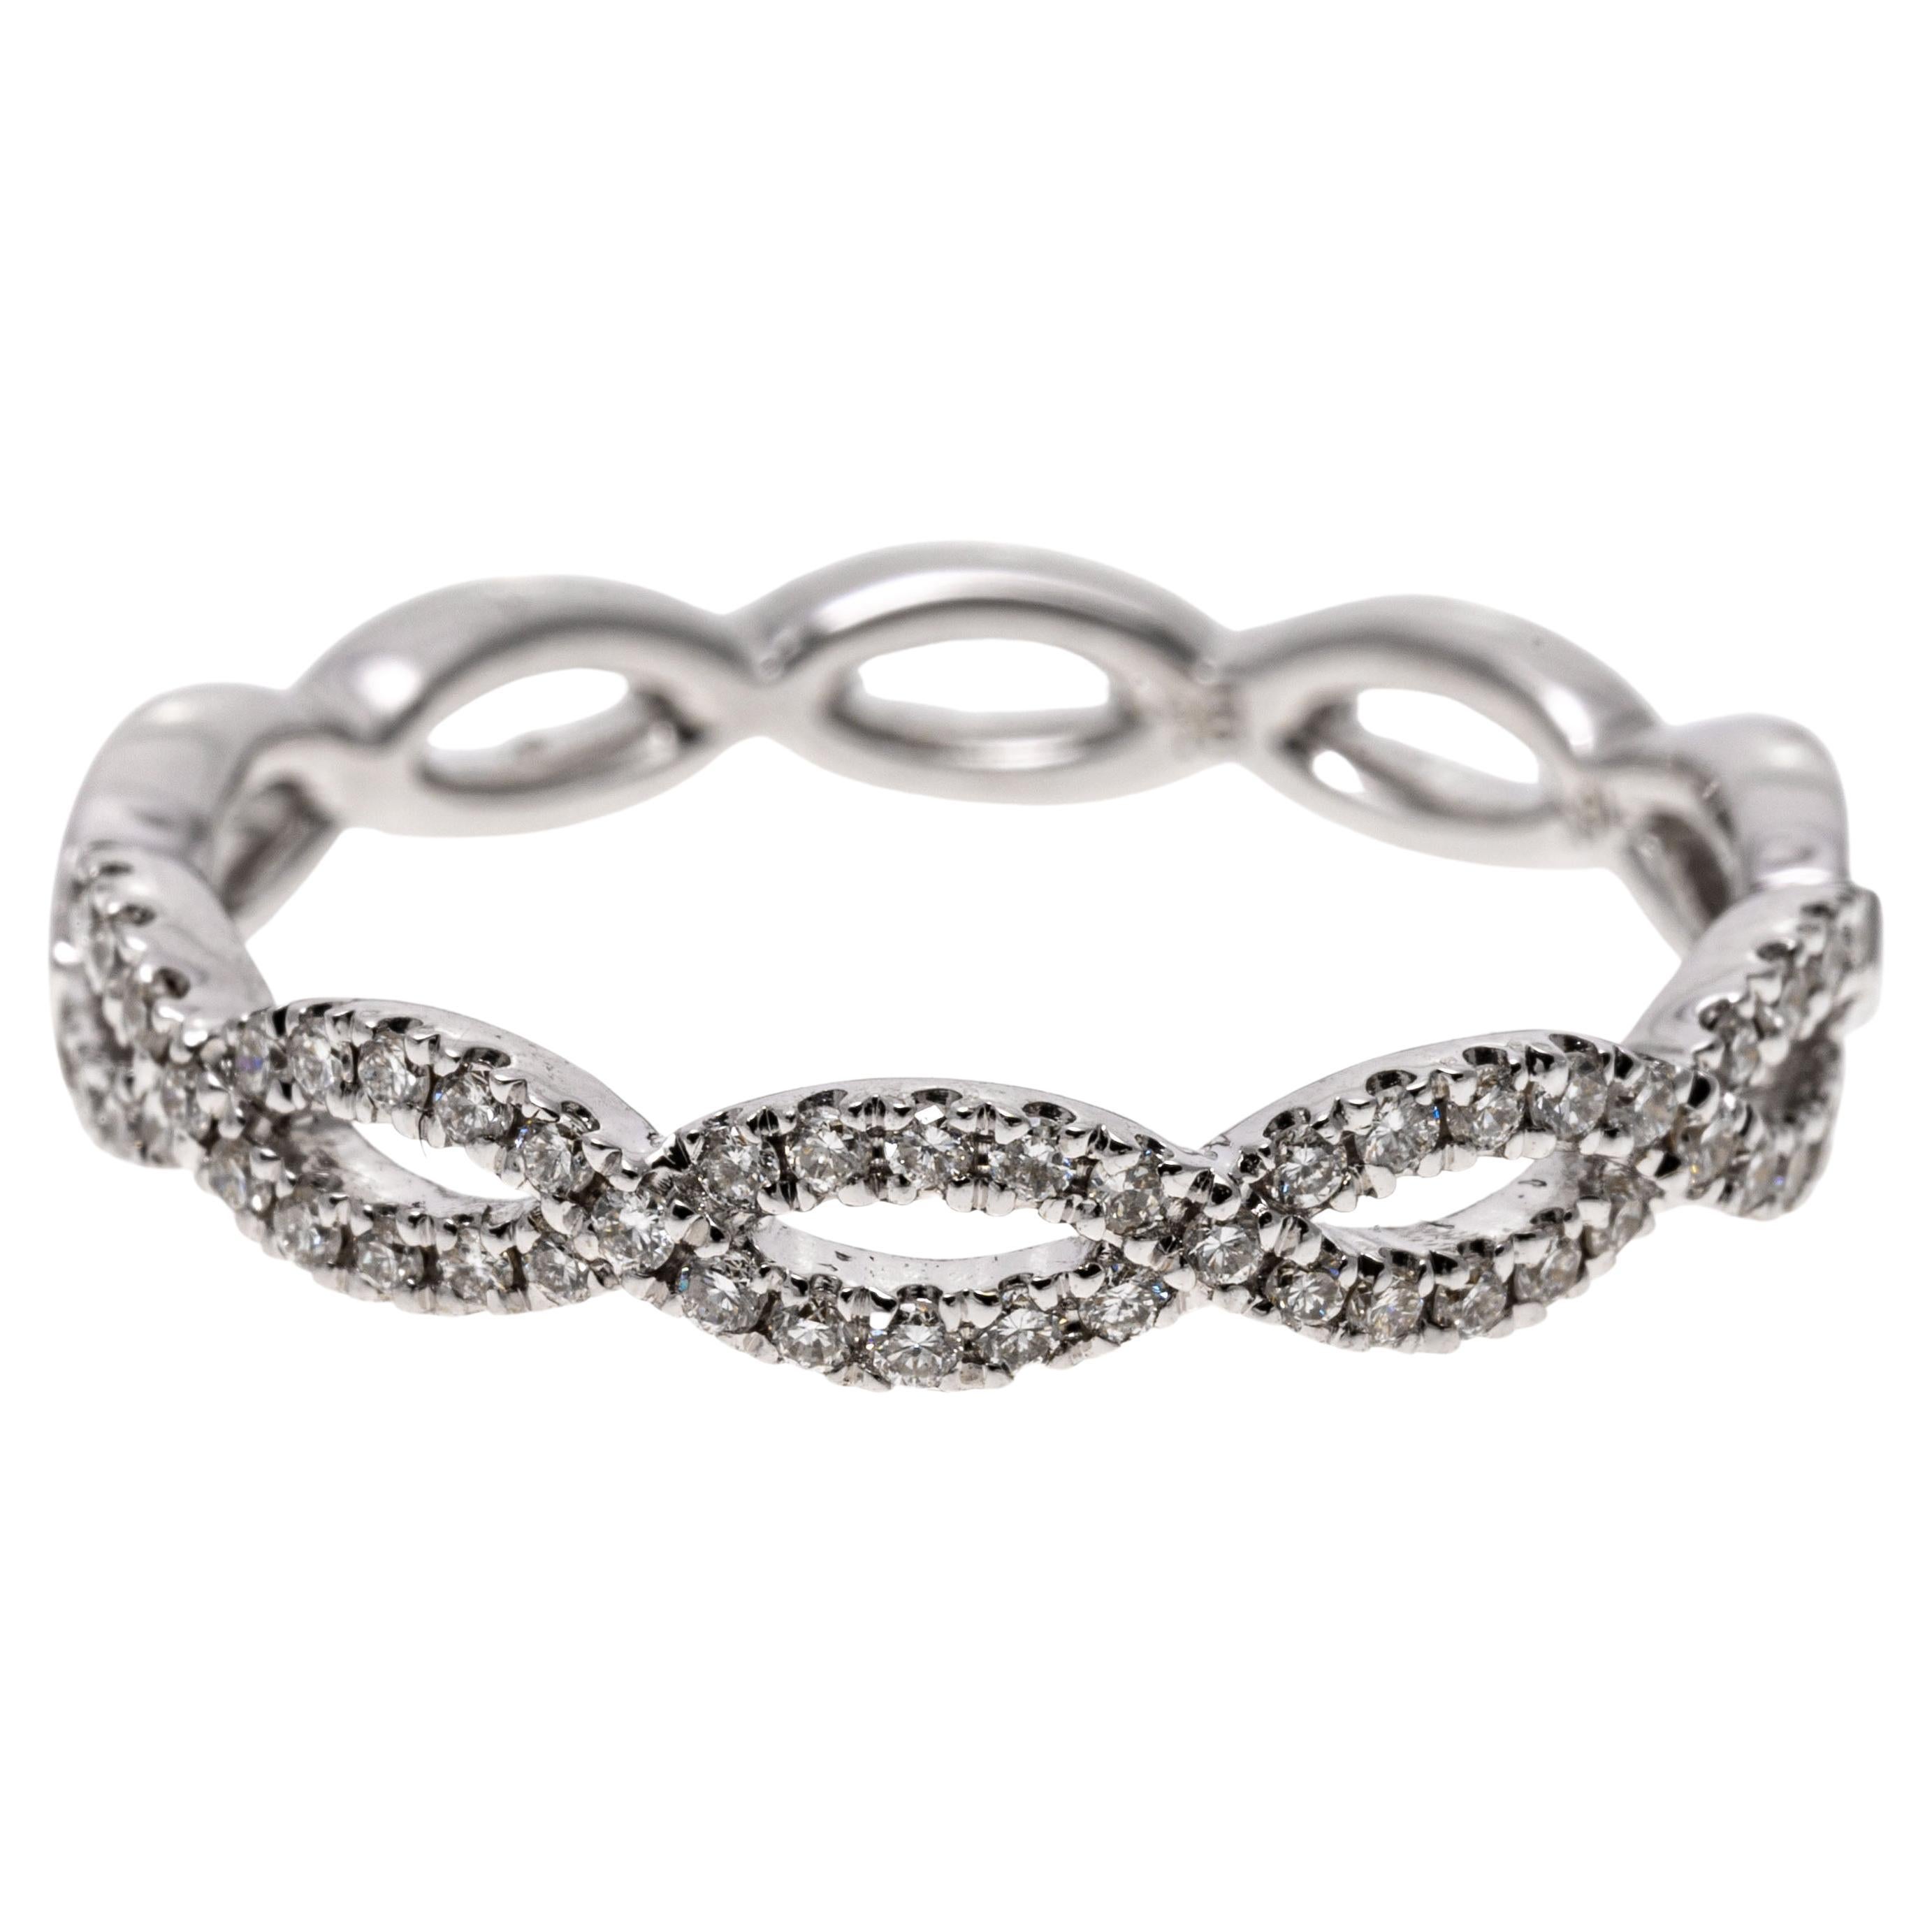 18k White Gold Open Twisted Band Ring Set with Diamonds, App. 0.12 TCW